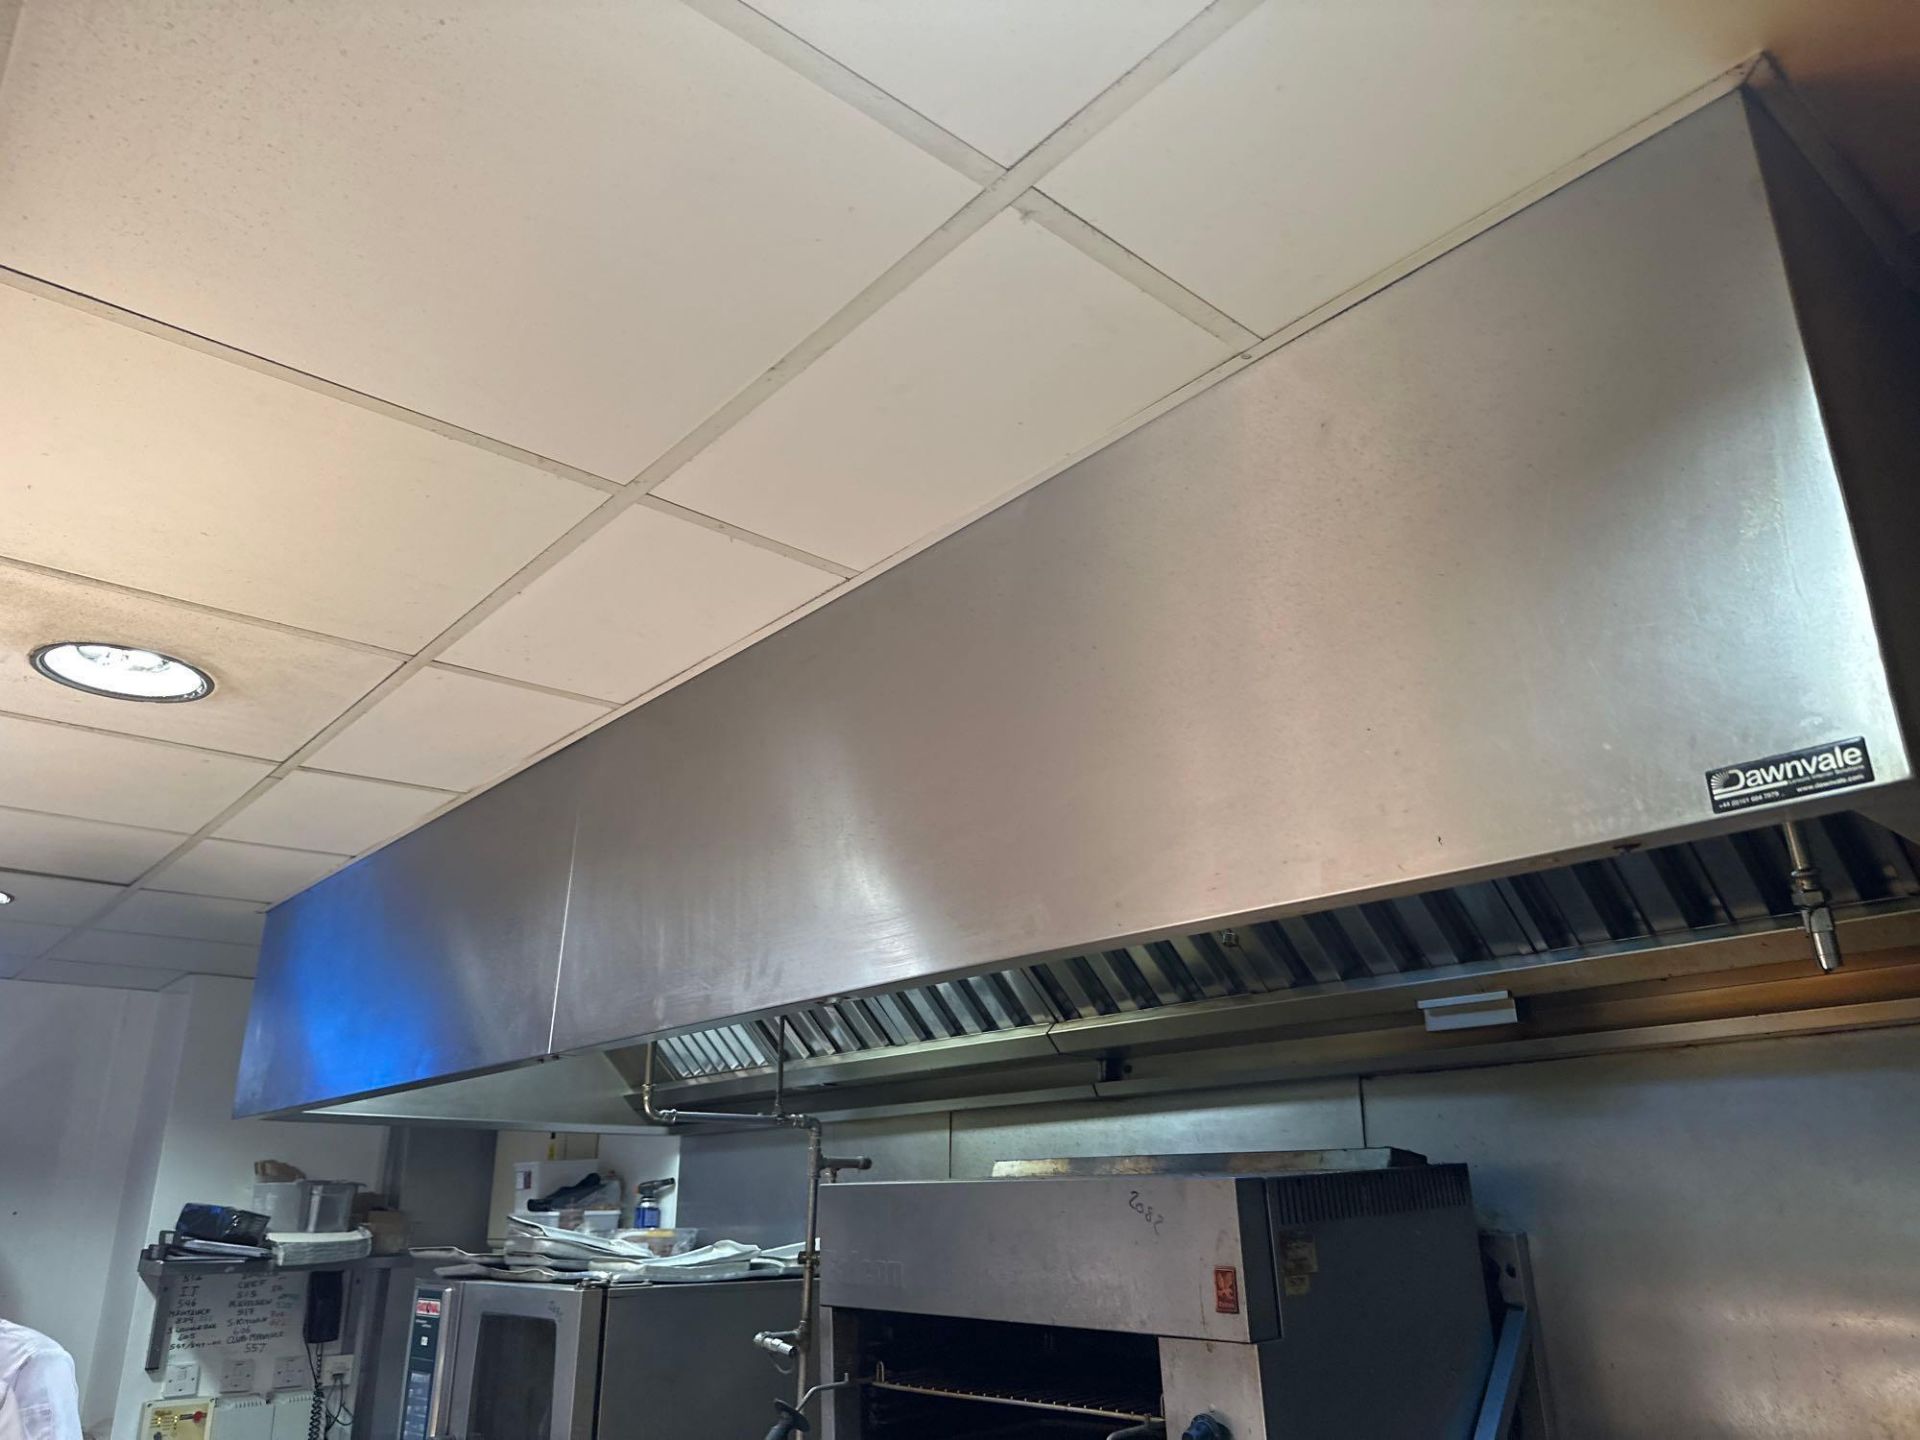 Dawnvale stainless steel baffle extraction canopy 3.5m x 120cm ( Location: Bar Kitchen)